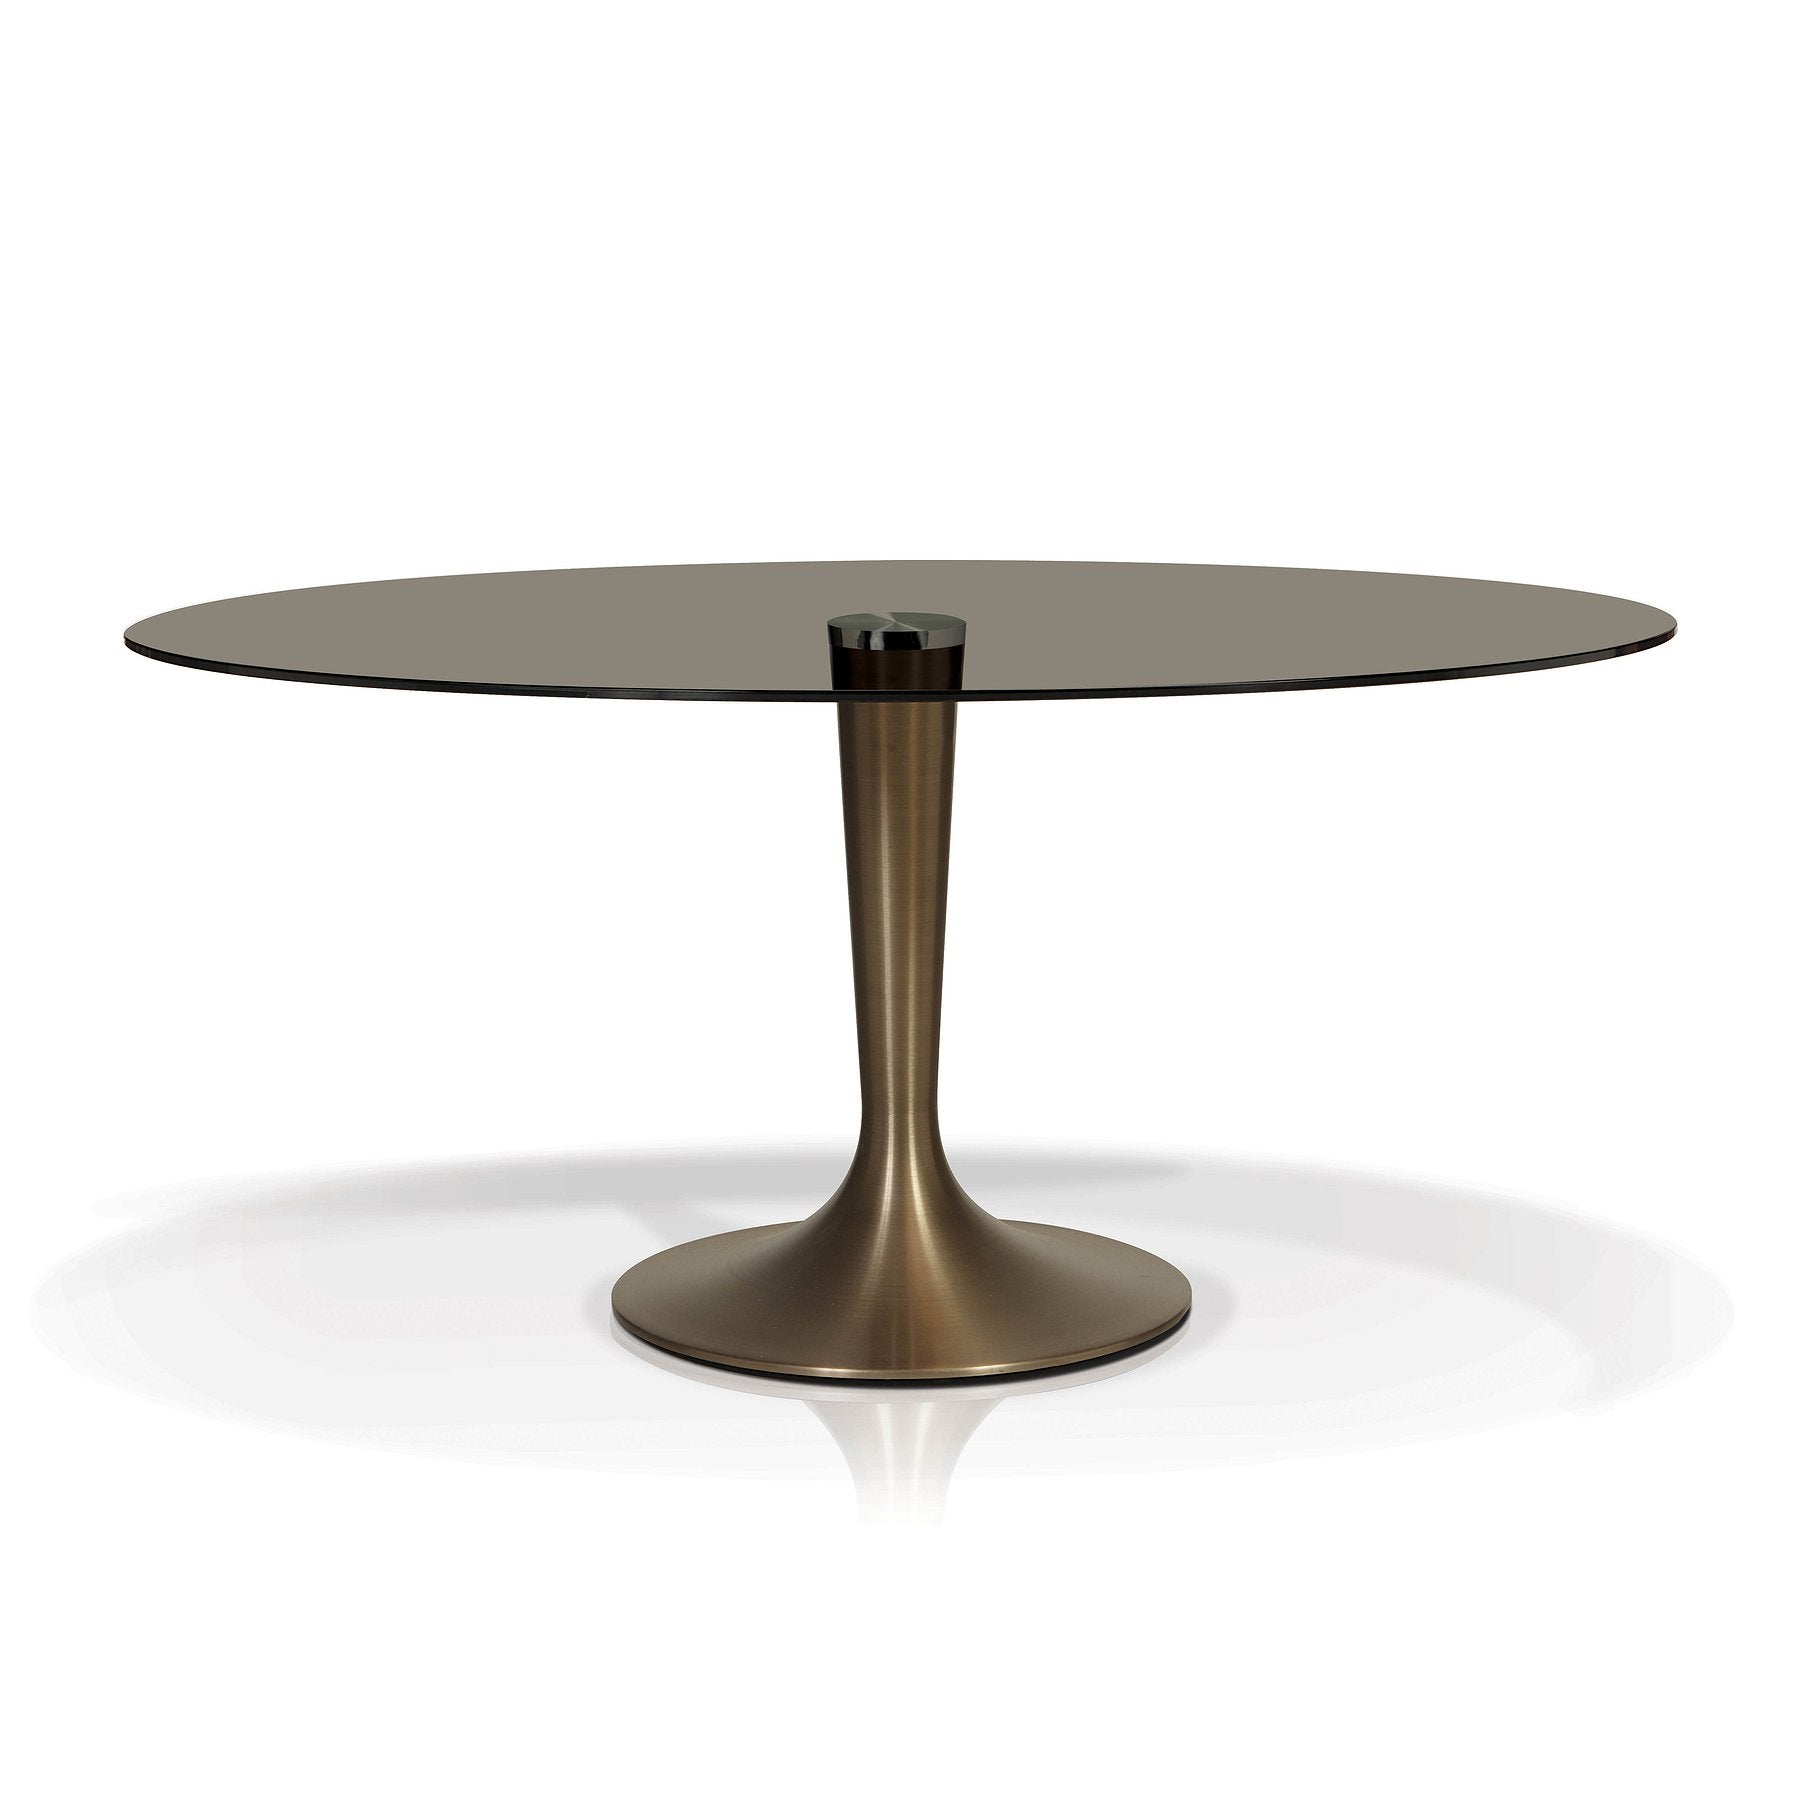 HT001 saturn - dining table - Dreamart Gallery